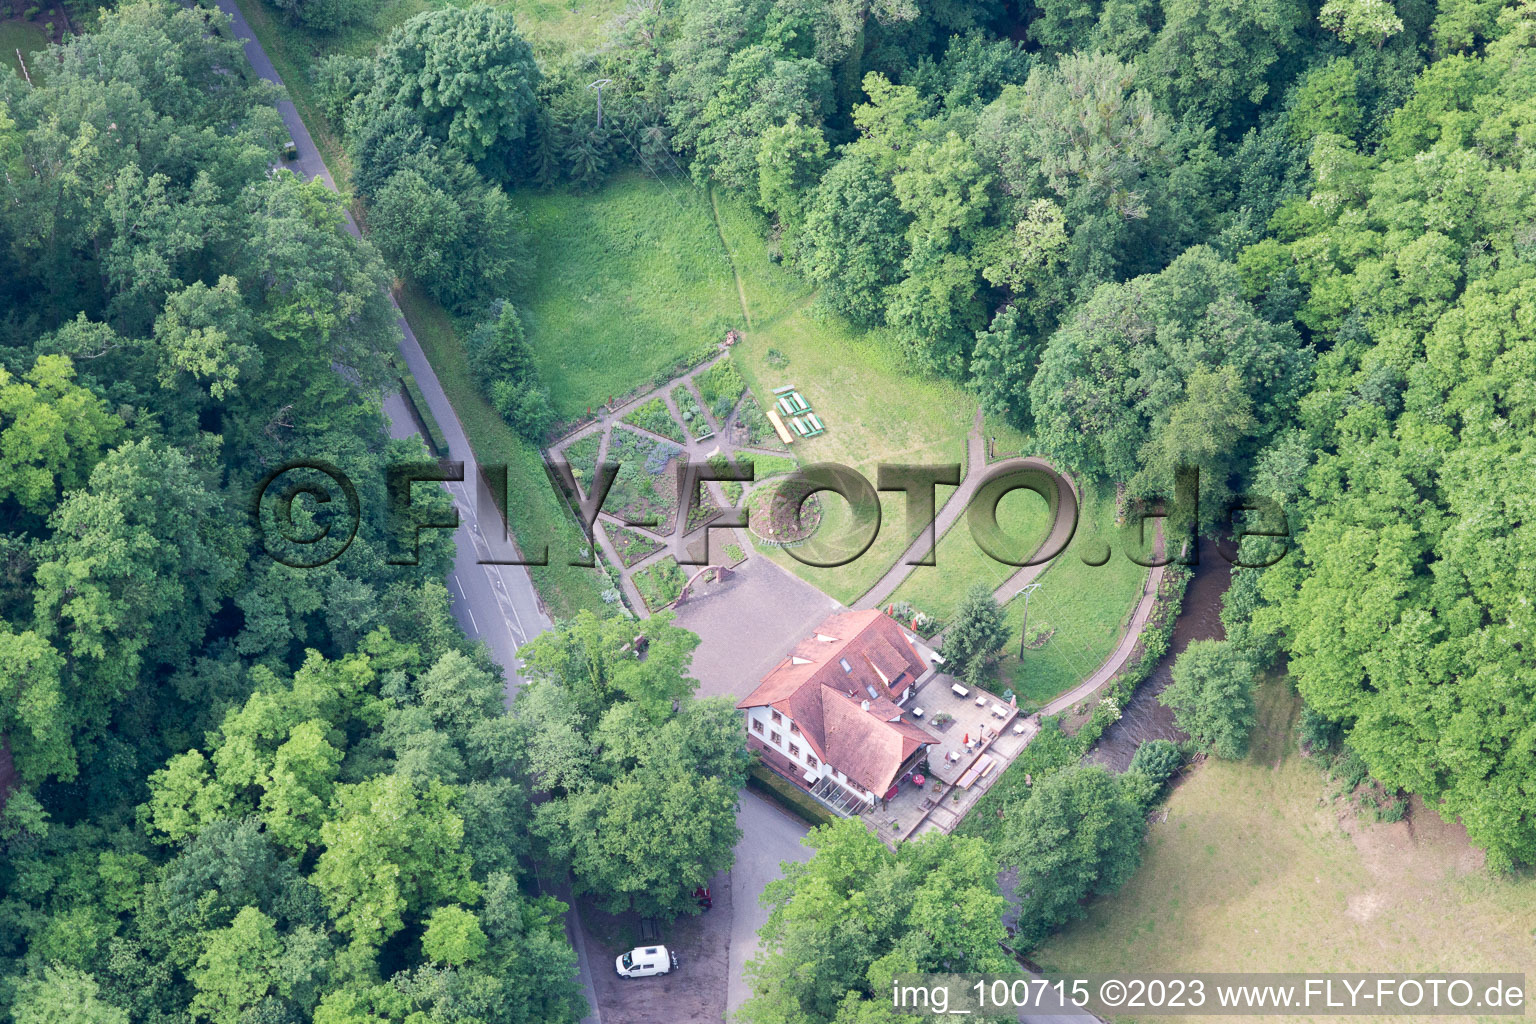 Sankt Germannshof in the state Rhineland-Palatinate, Germany seen from a drone